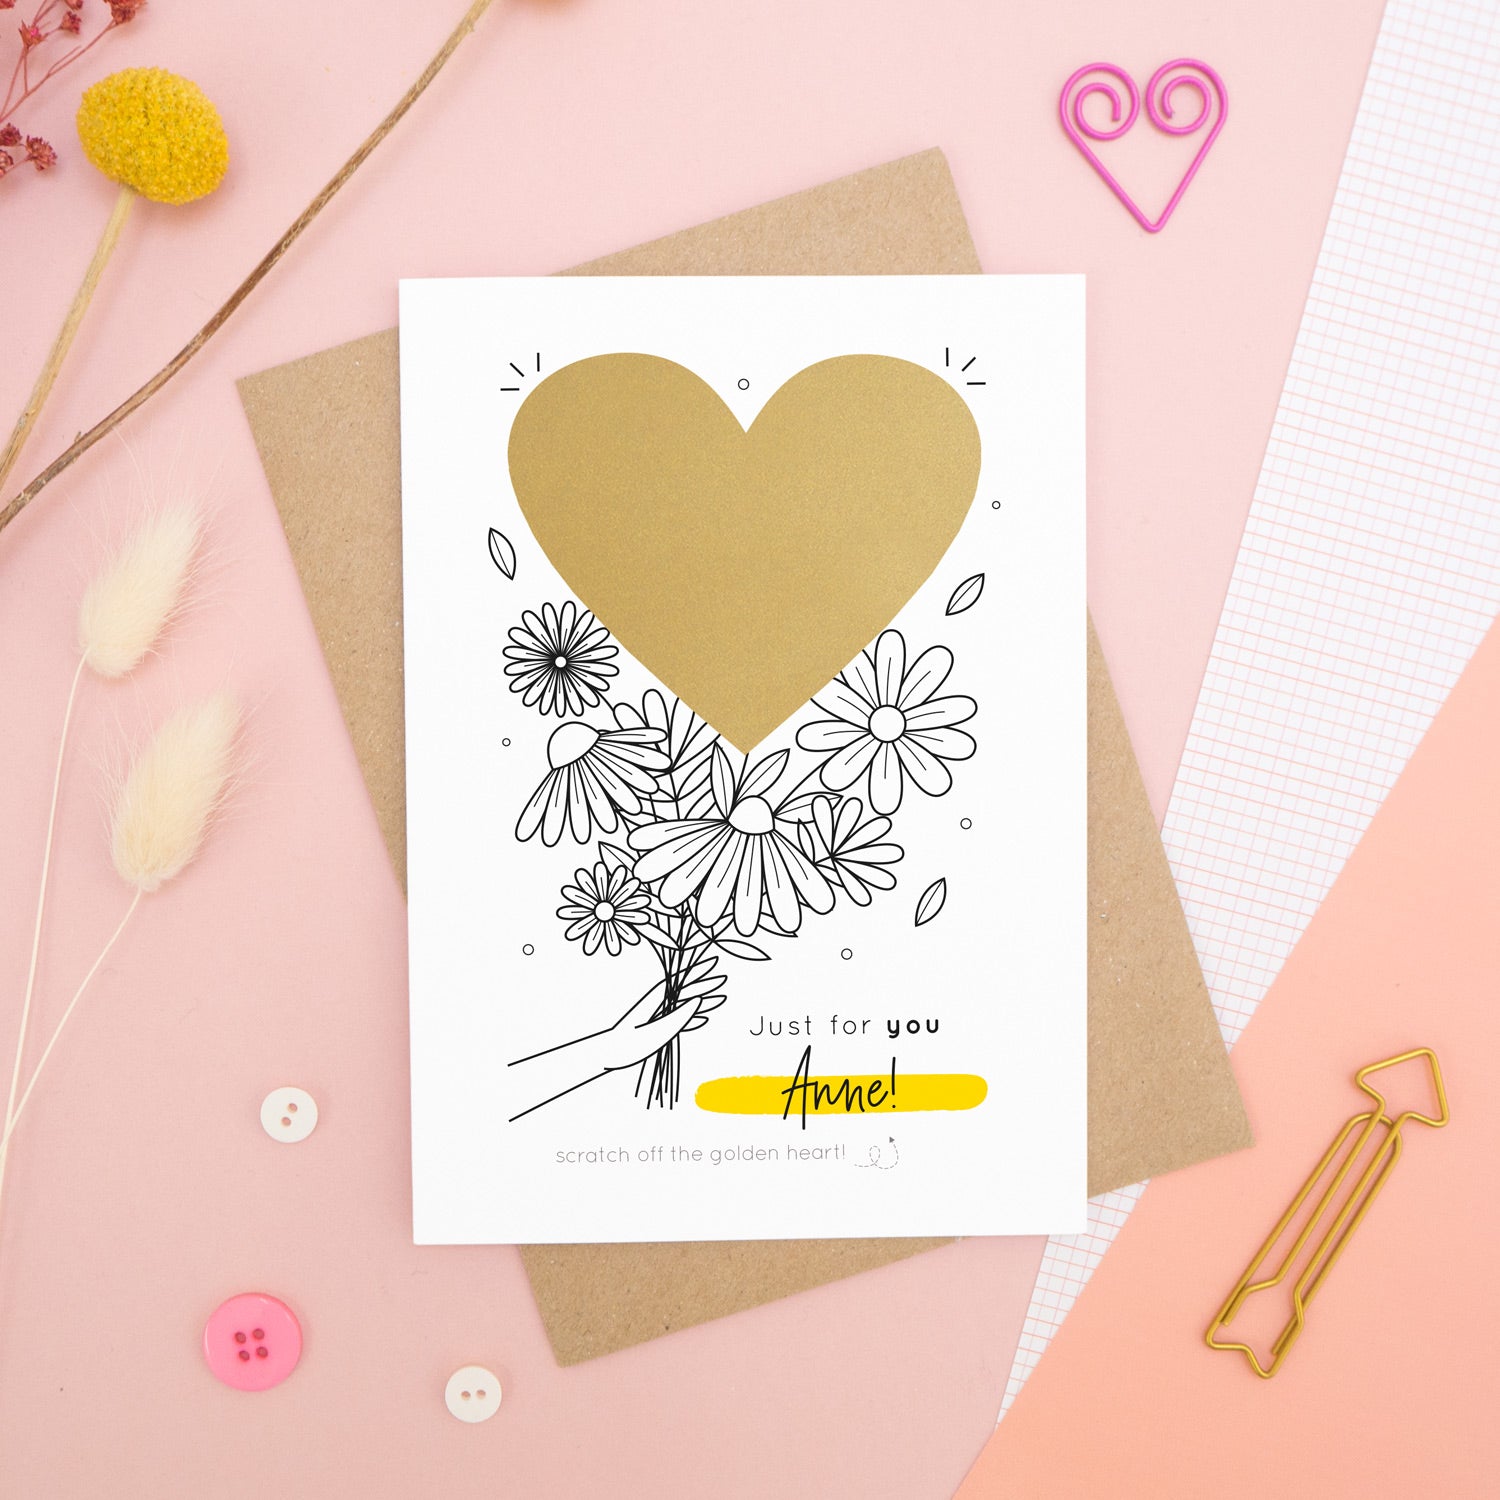 A personalised flower bouquet scratch card photographed on a pink background with floral props, paper clips, and buttons. This card shows a black and white floral illustration and the golden heart before it is scratched off to reveal the secret message!